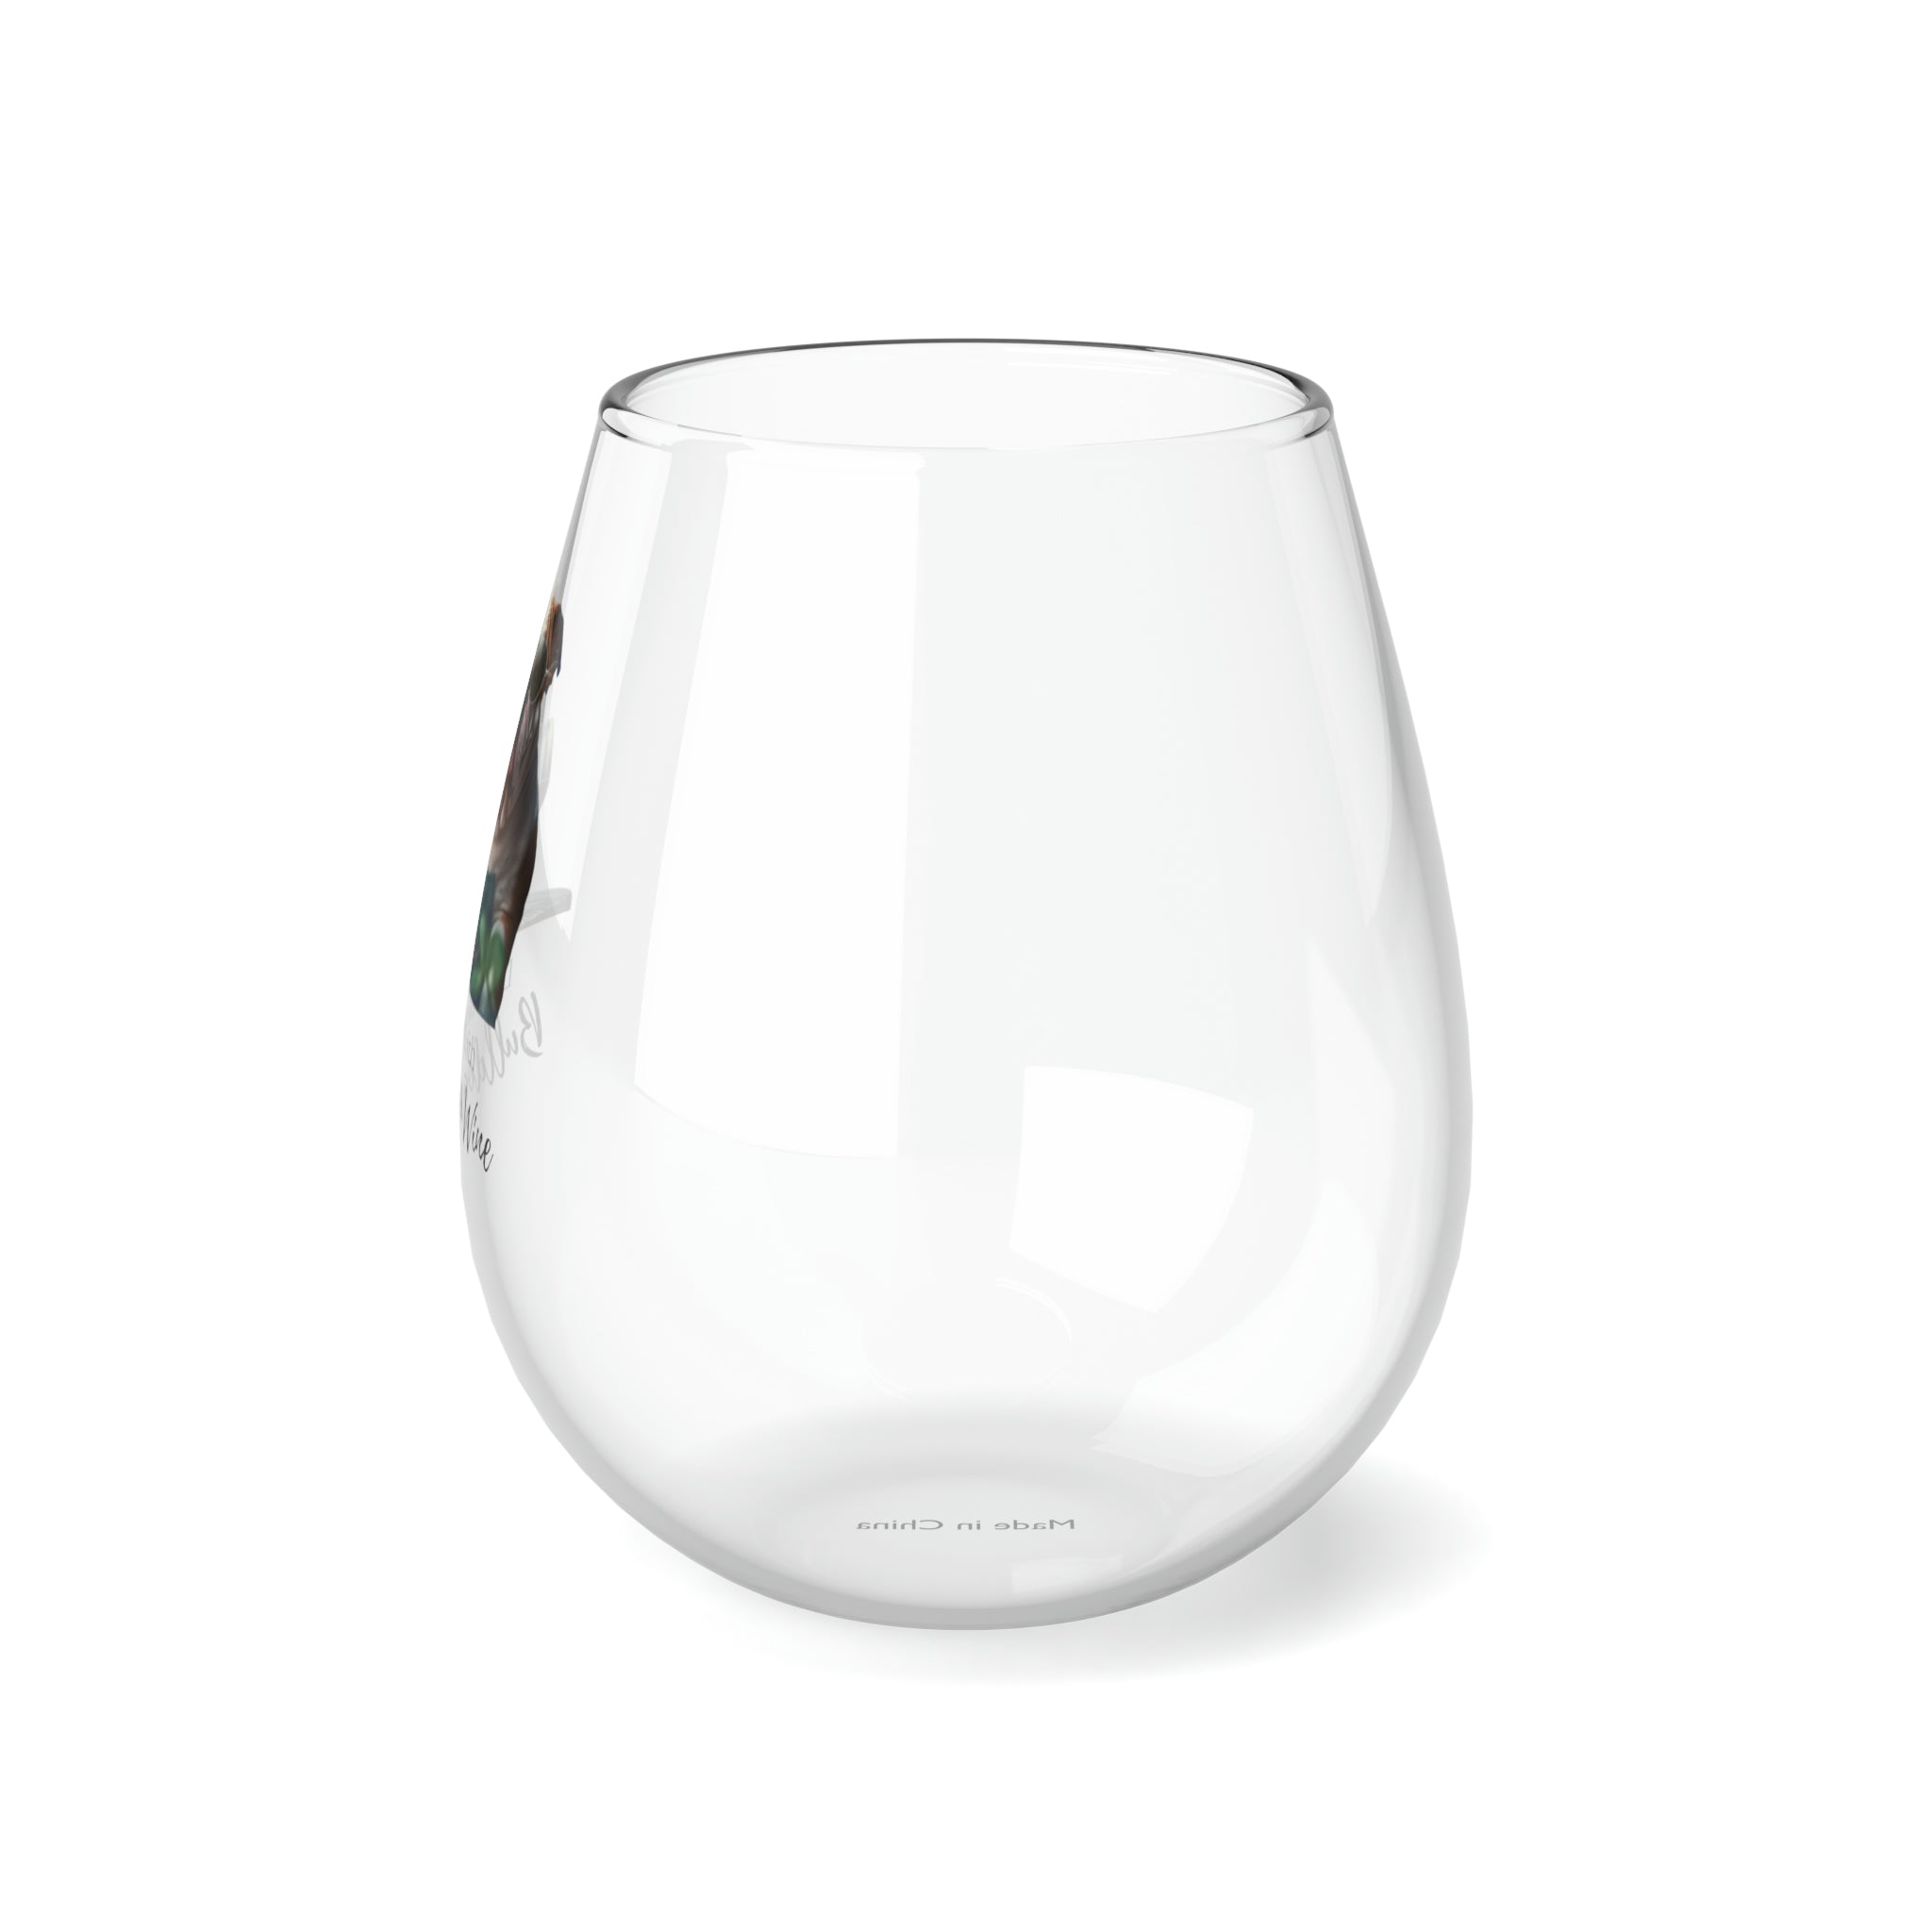 Life is Better with Bulldogs & Wine" Stemless Glass - English Bulldog